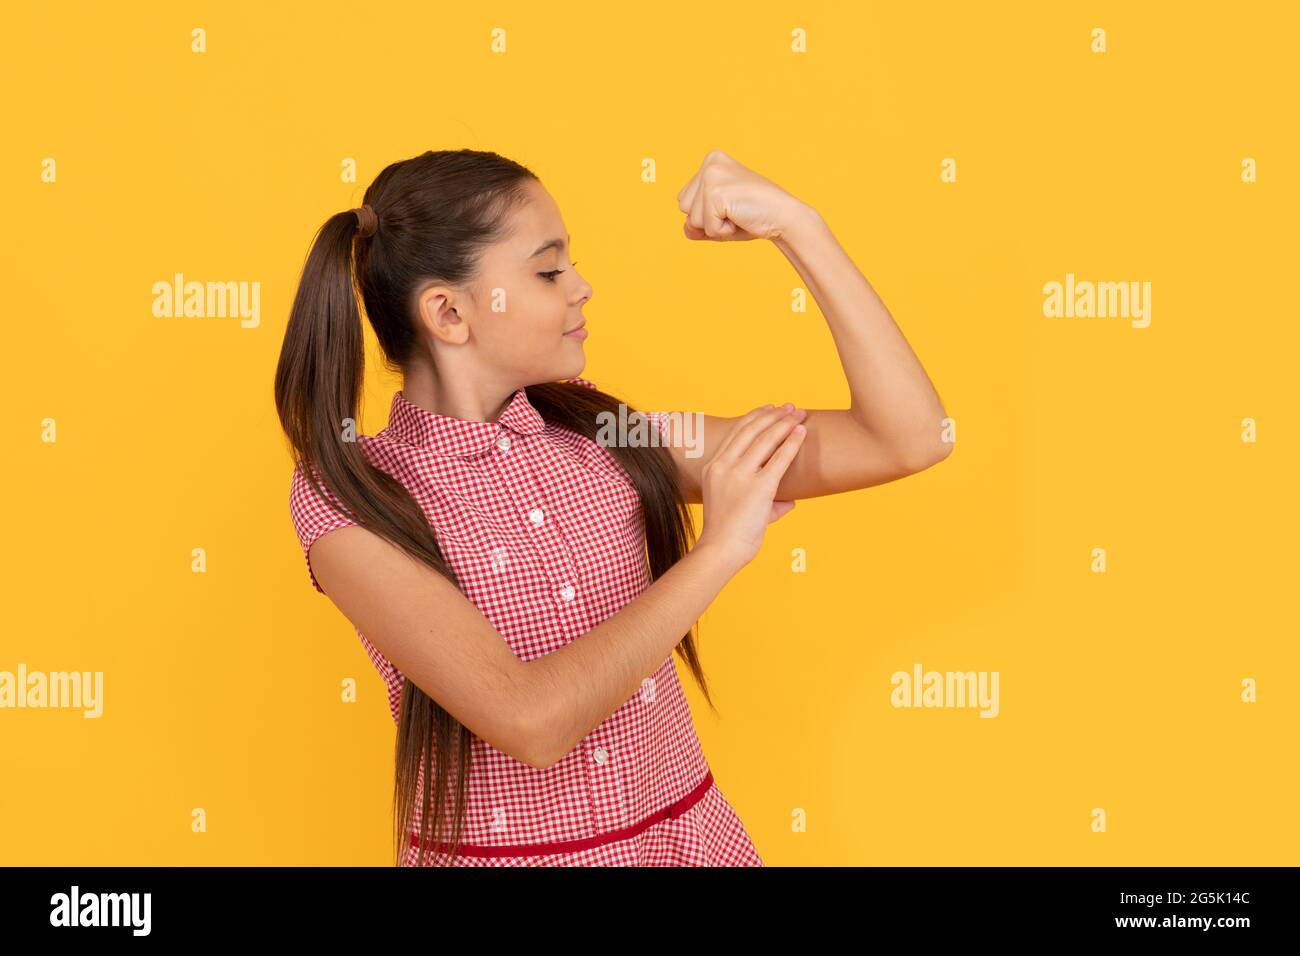 Girl power. Female child flex arm yellow background. Gesture of power and strength. CRL PWR Stock Photo